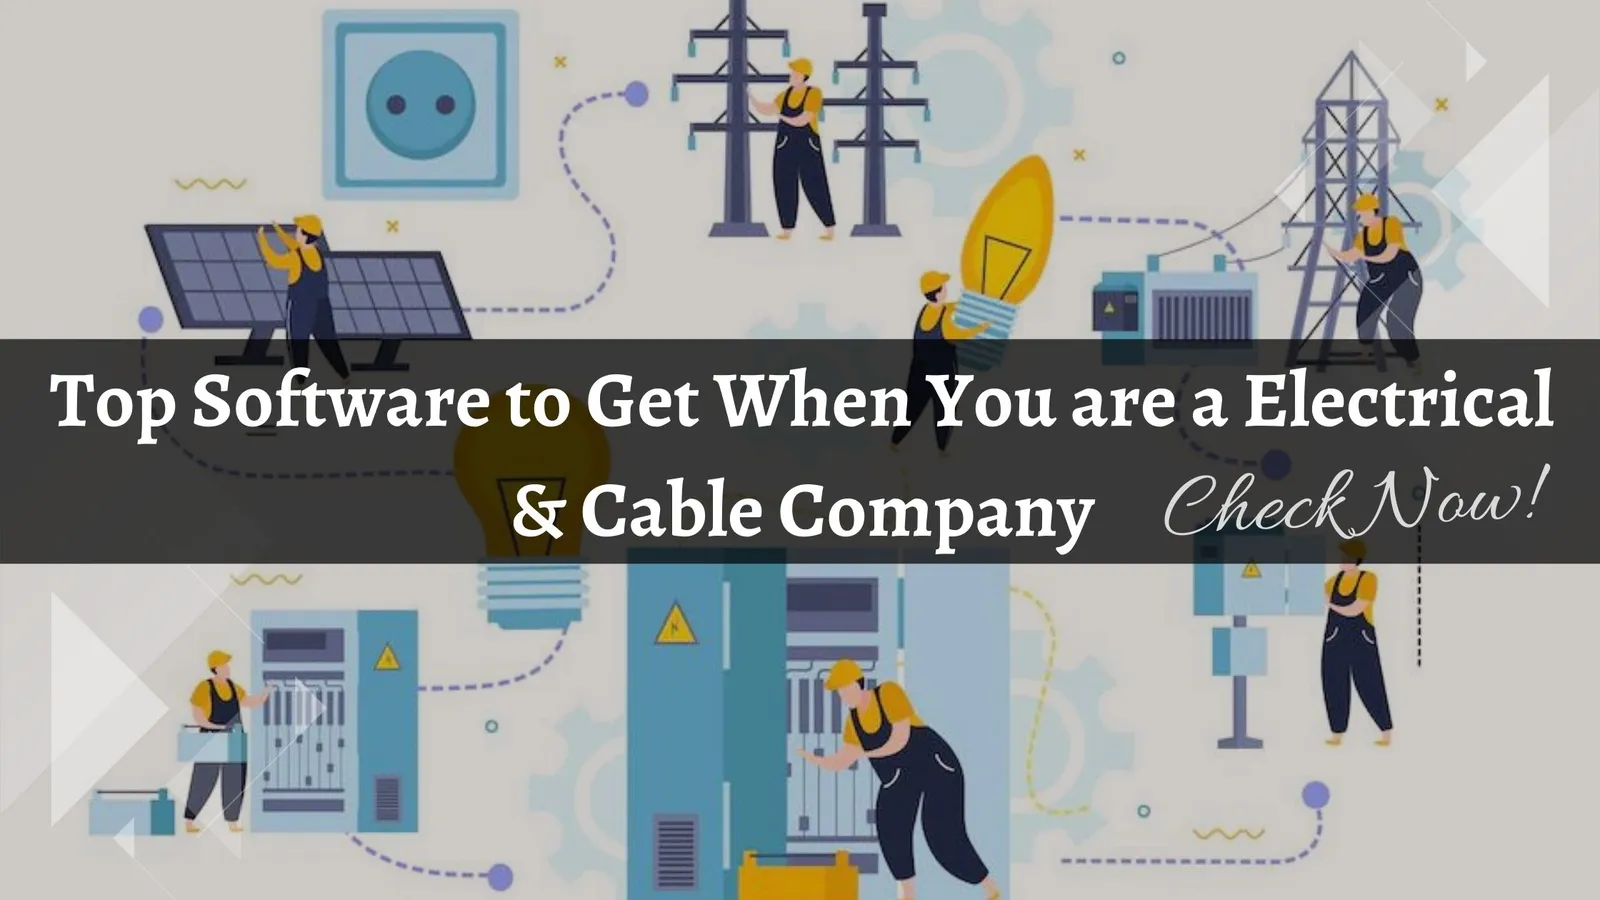 Top Software to Get When You are a Electrical & Cable Company